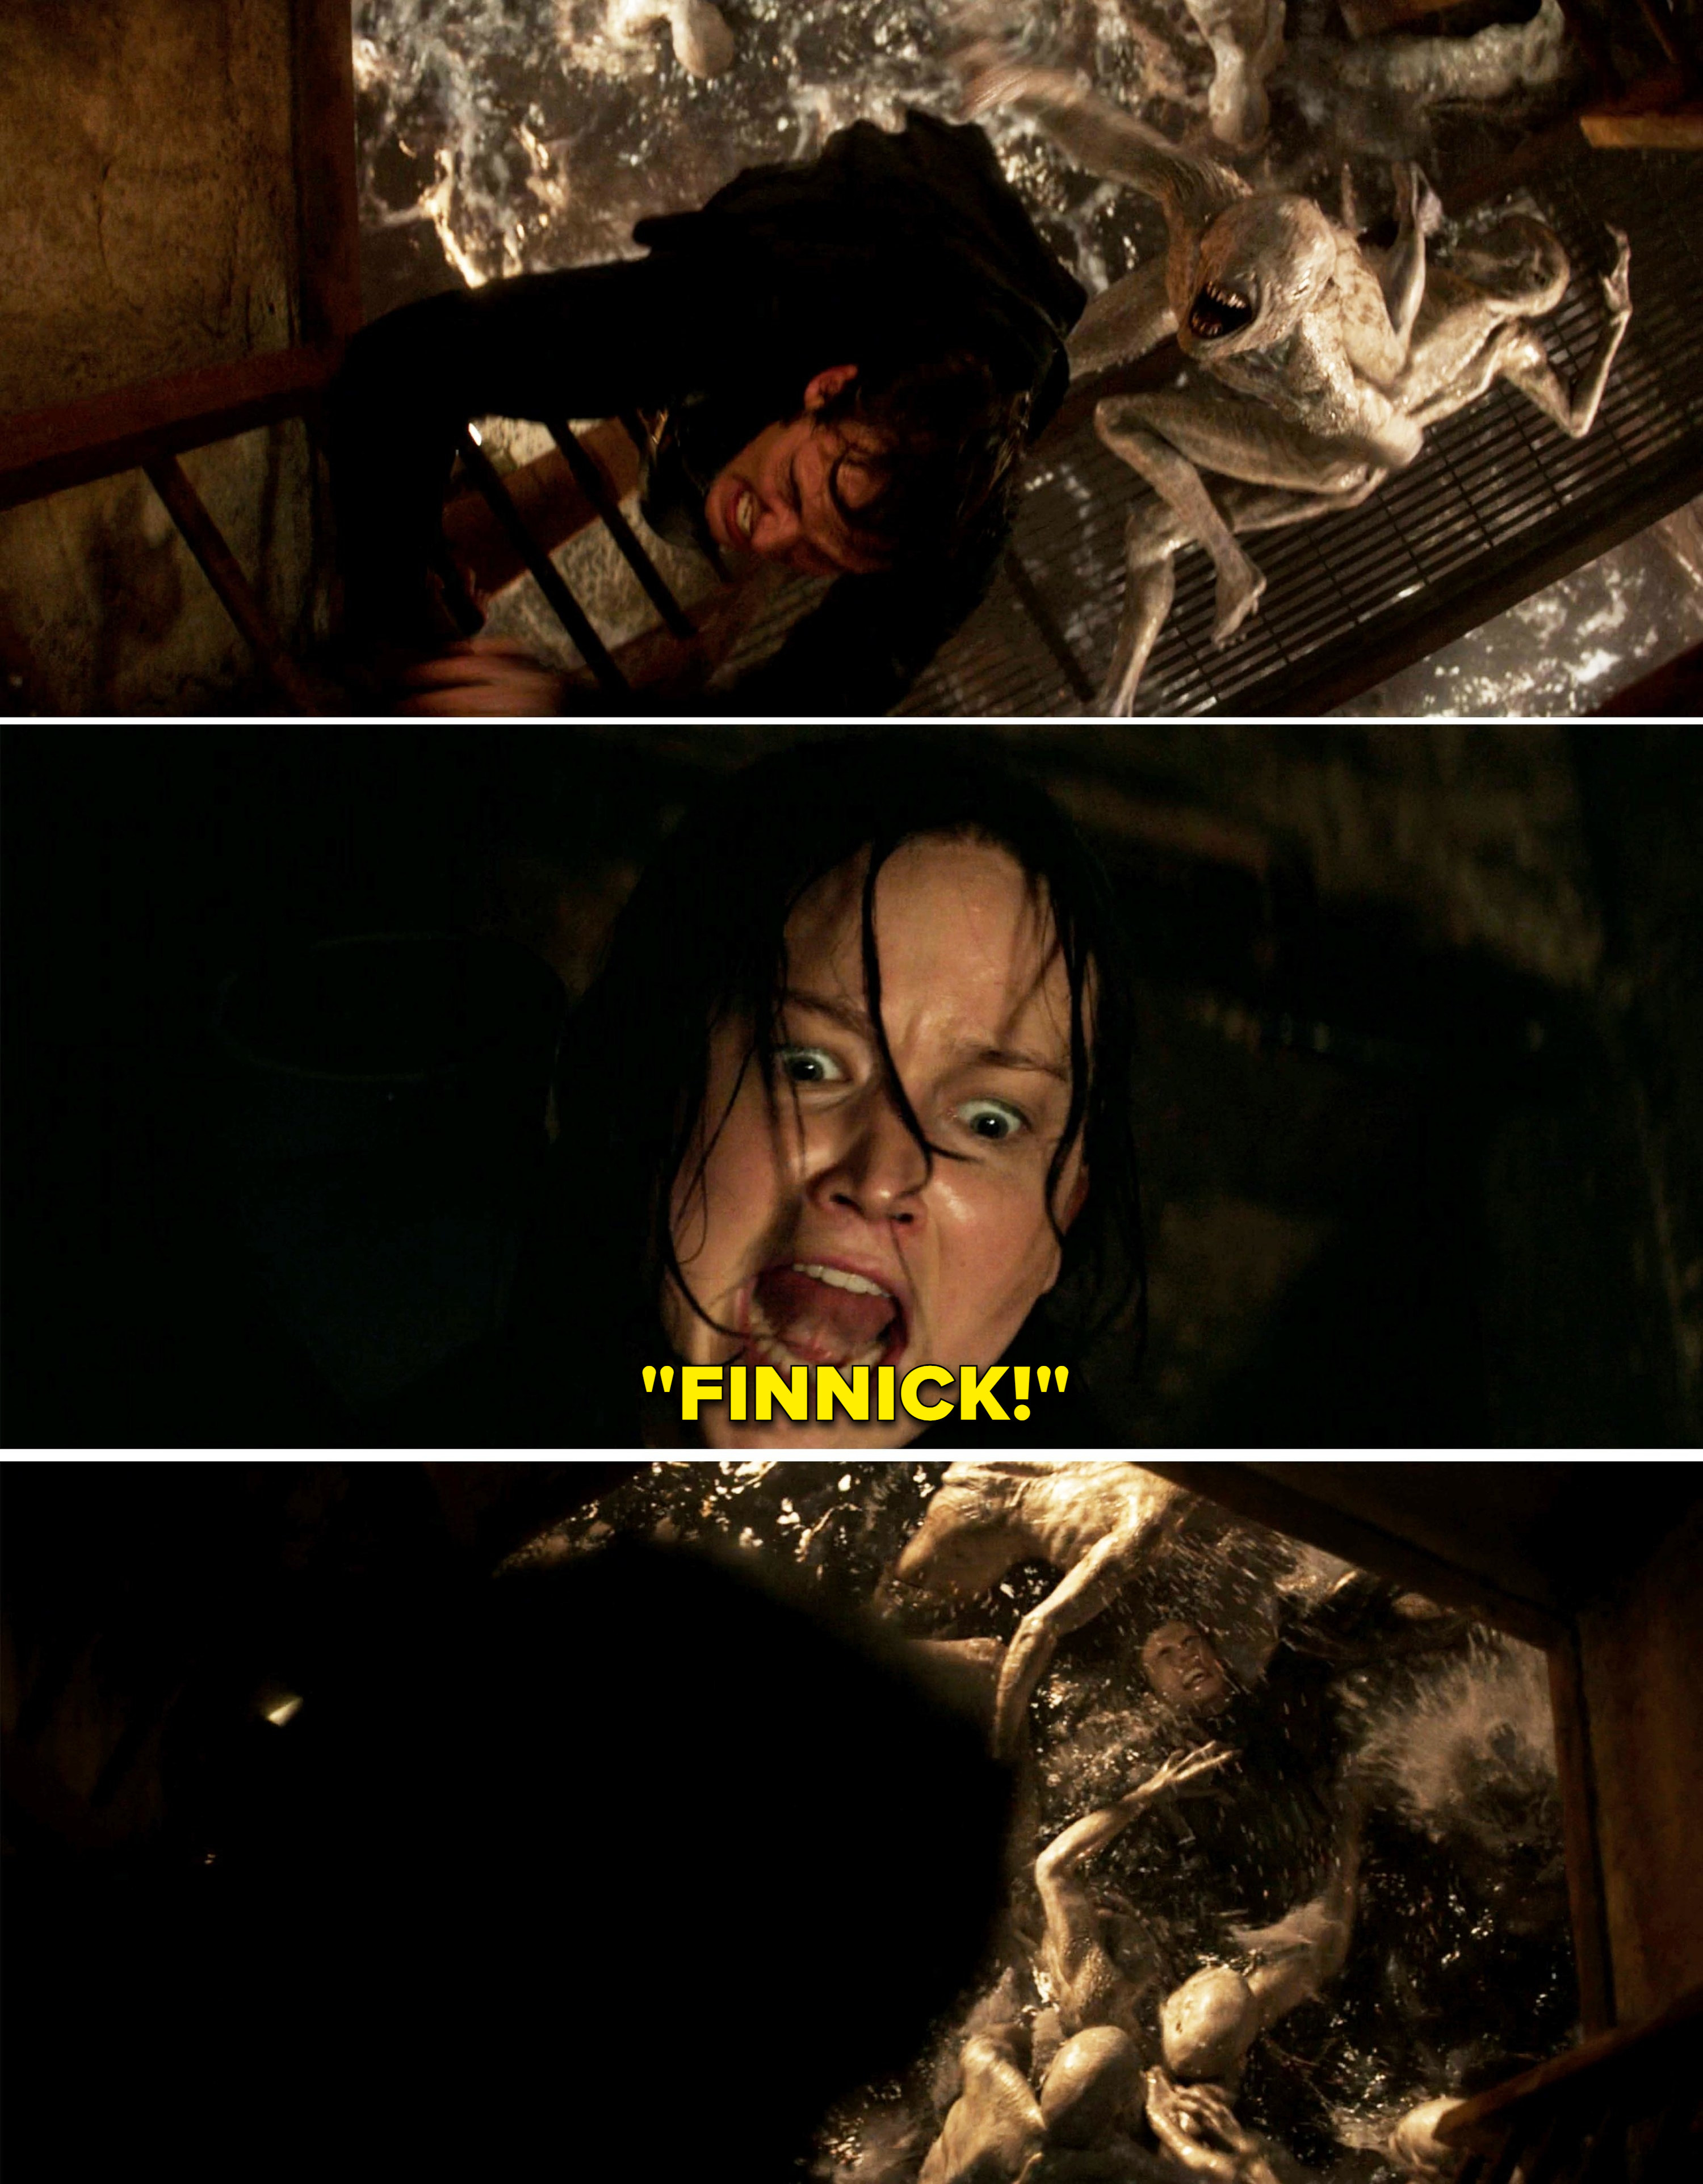 Katniss yelling down at a fallen Finnick